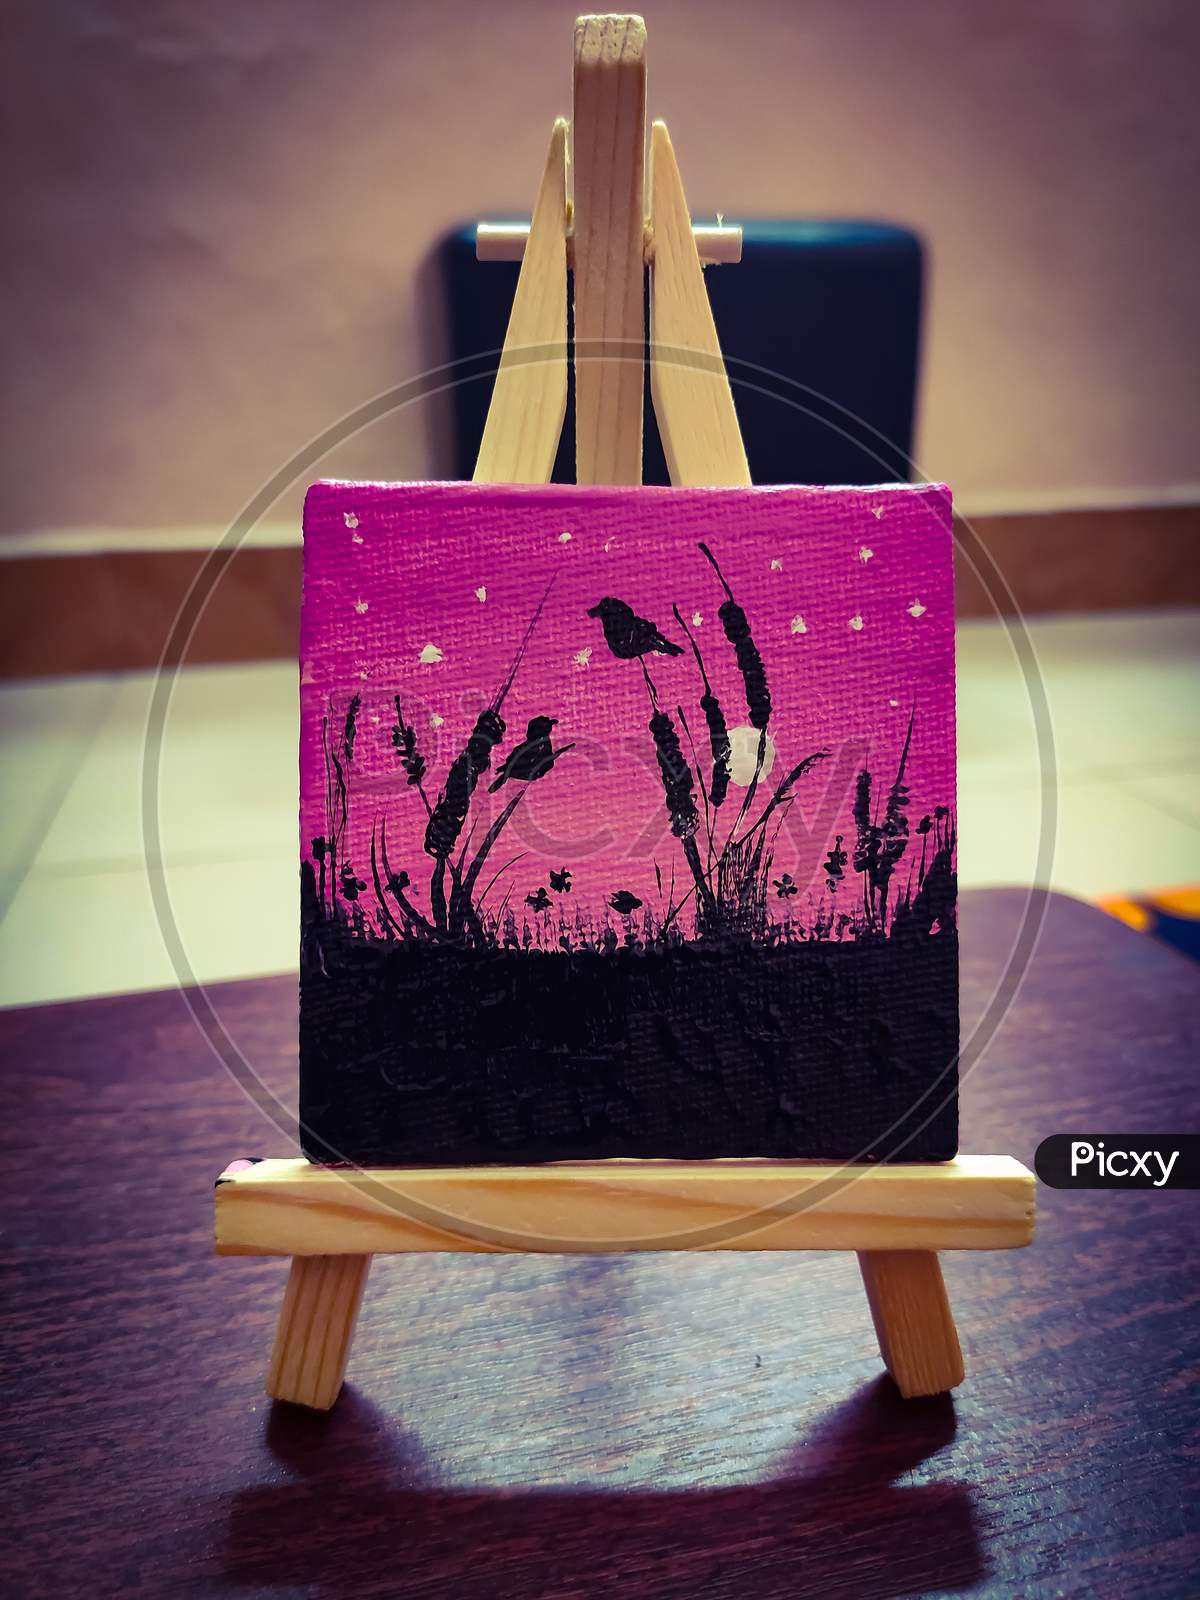 A beautiful mini acrylic painting on 3 by 3" canvas on easle stand.